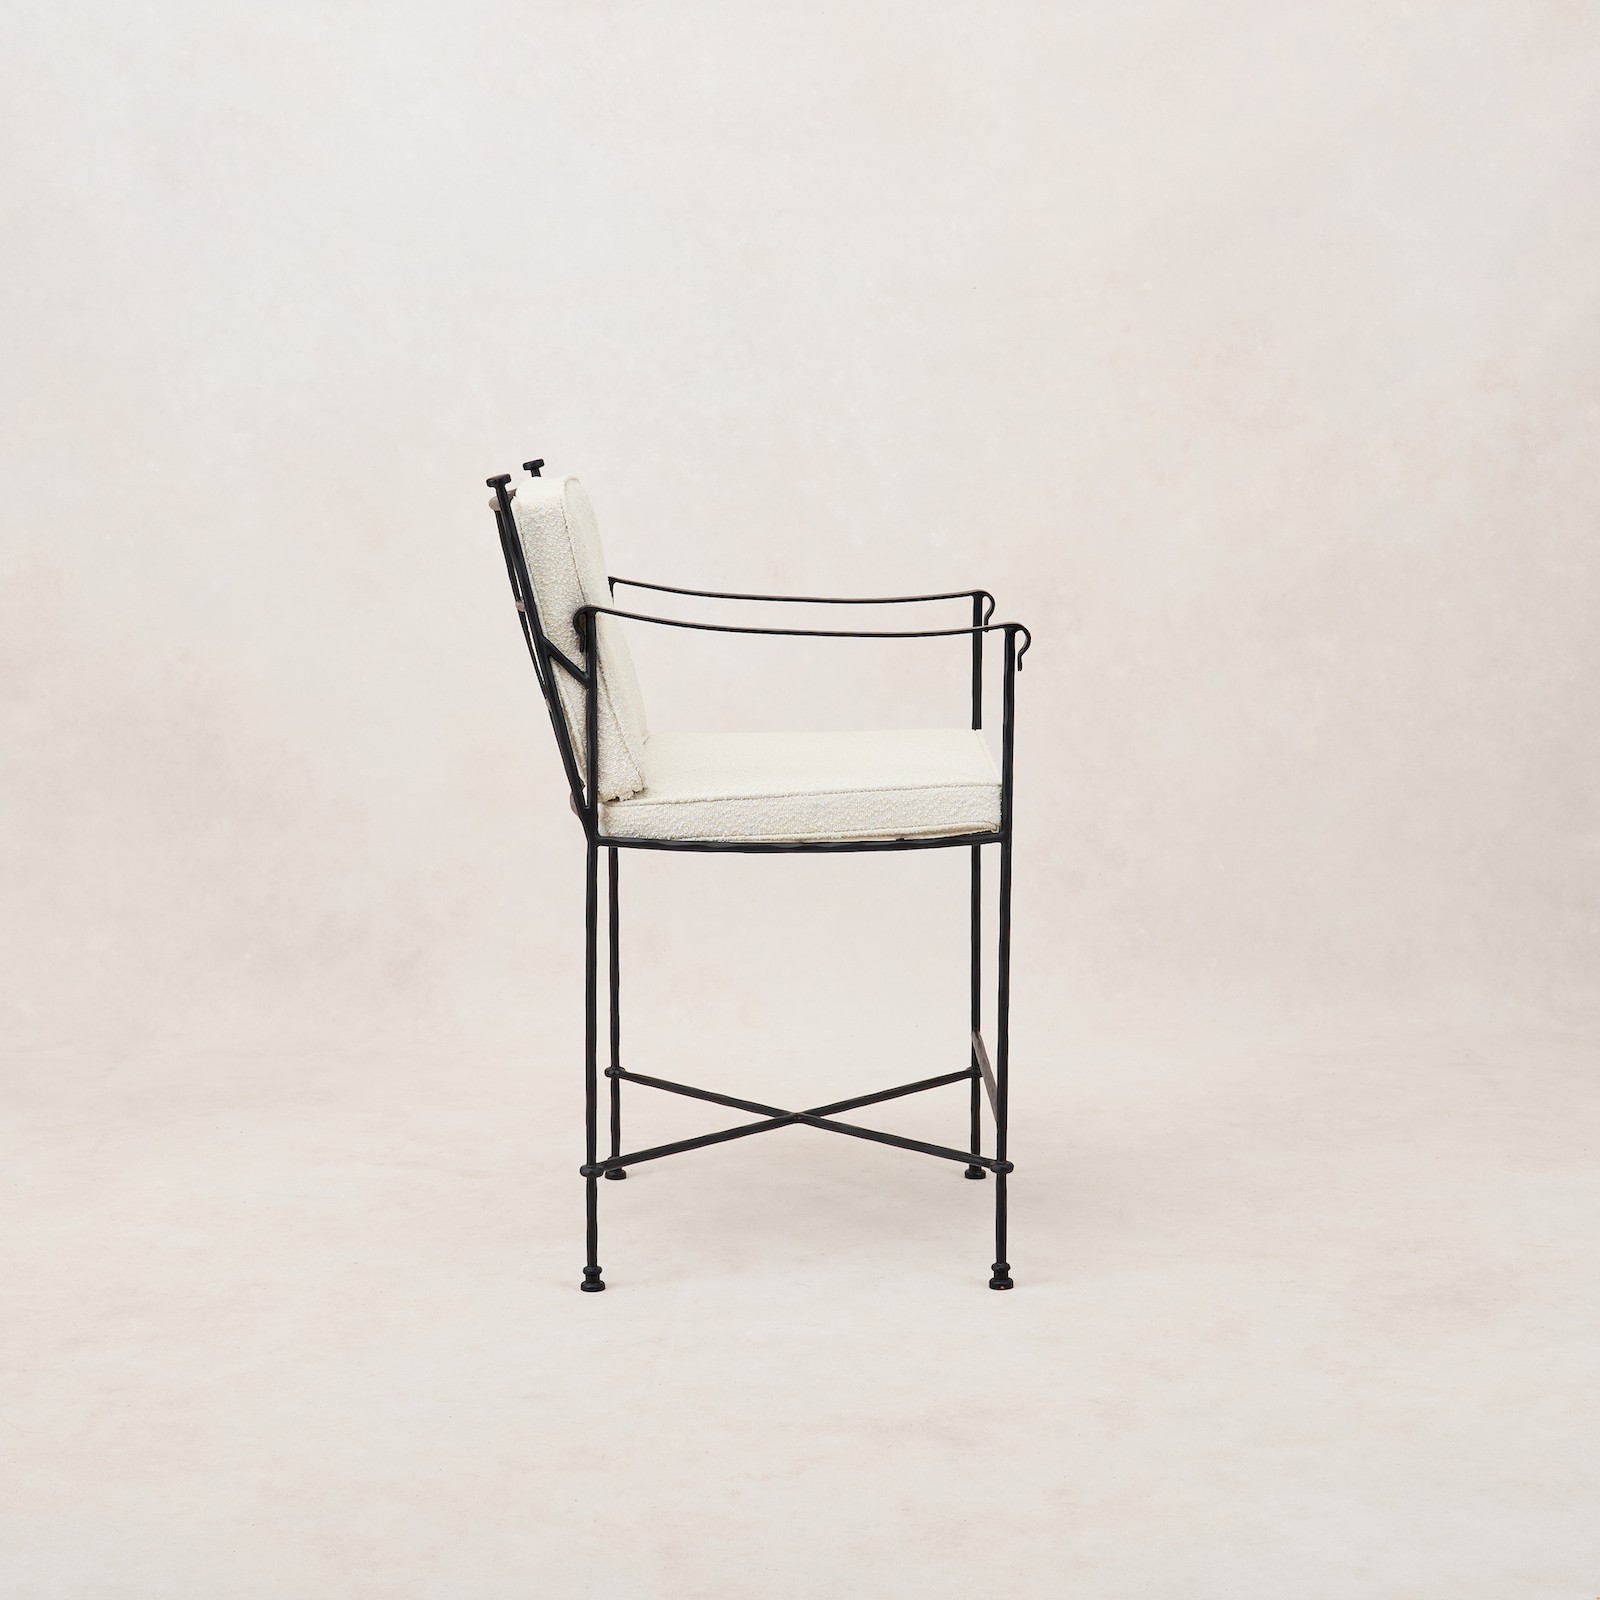 a black and white chair on a white background